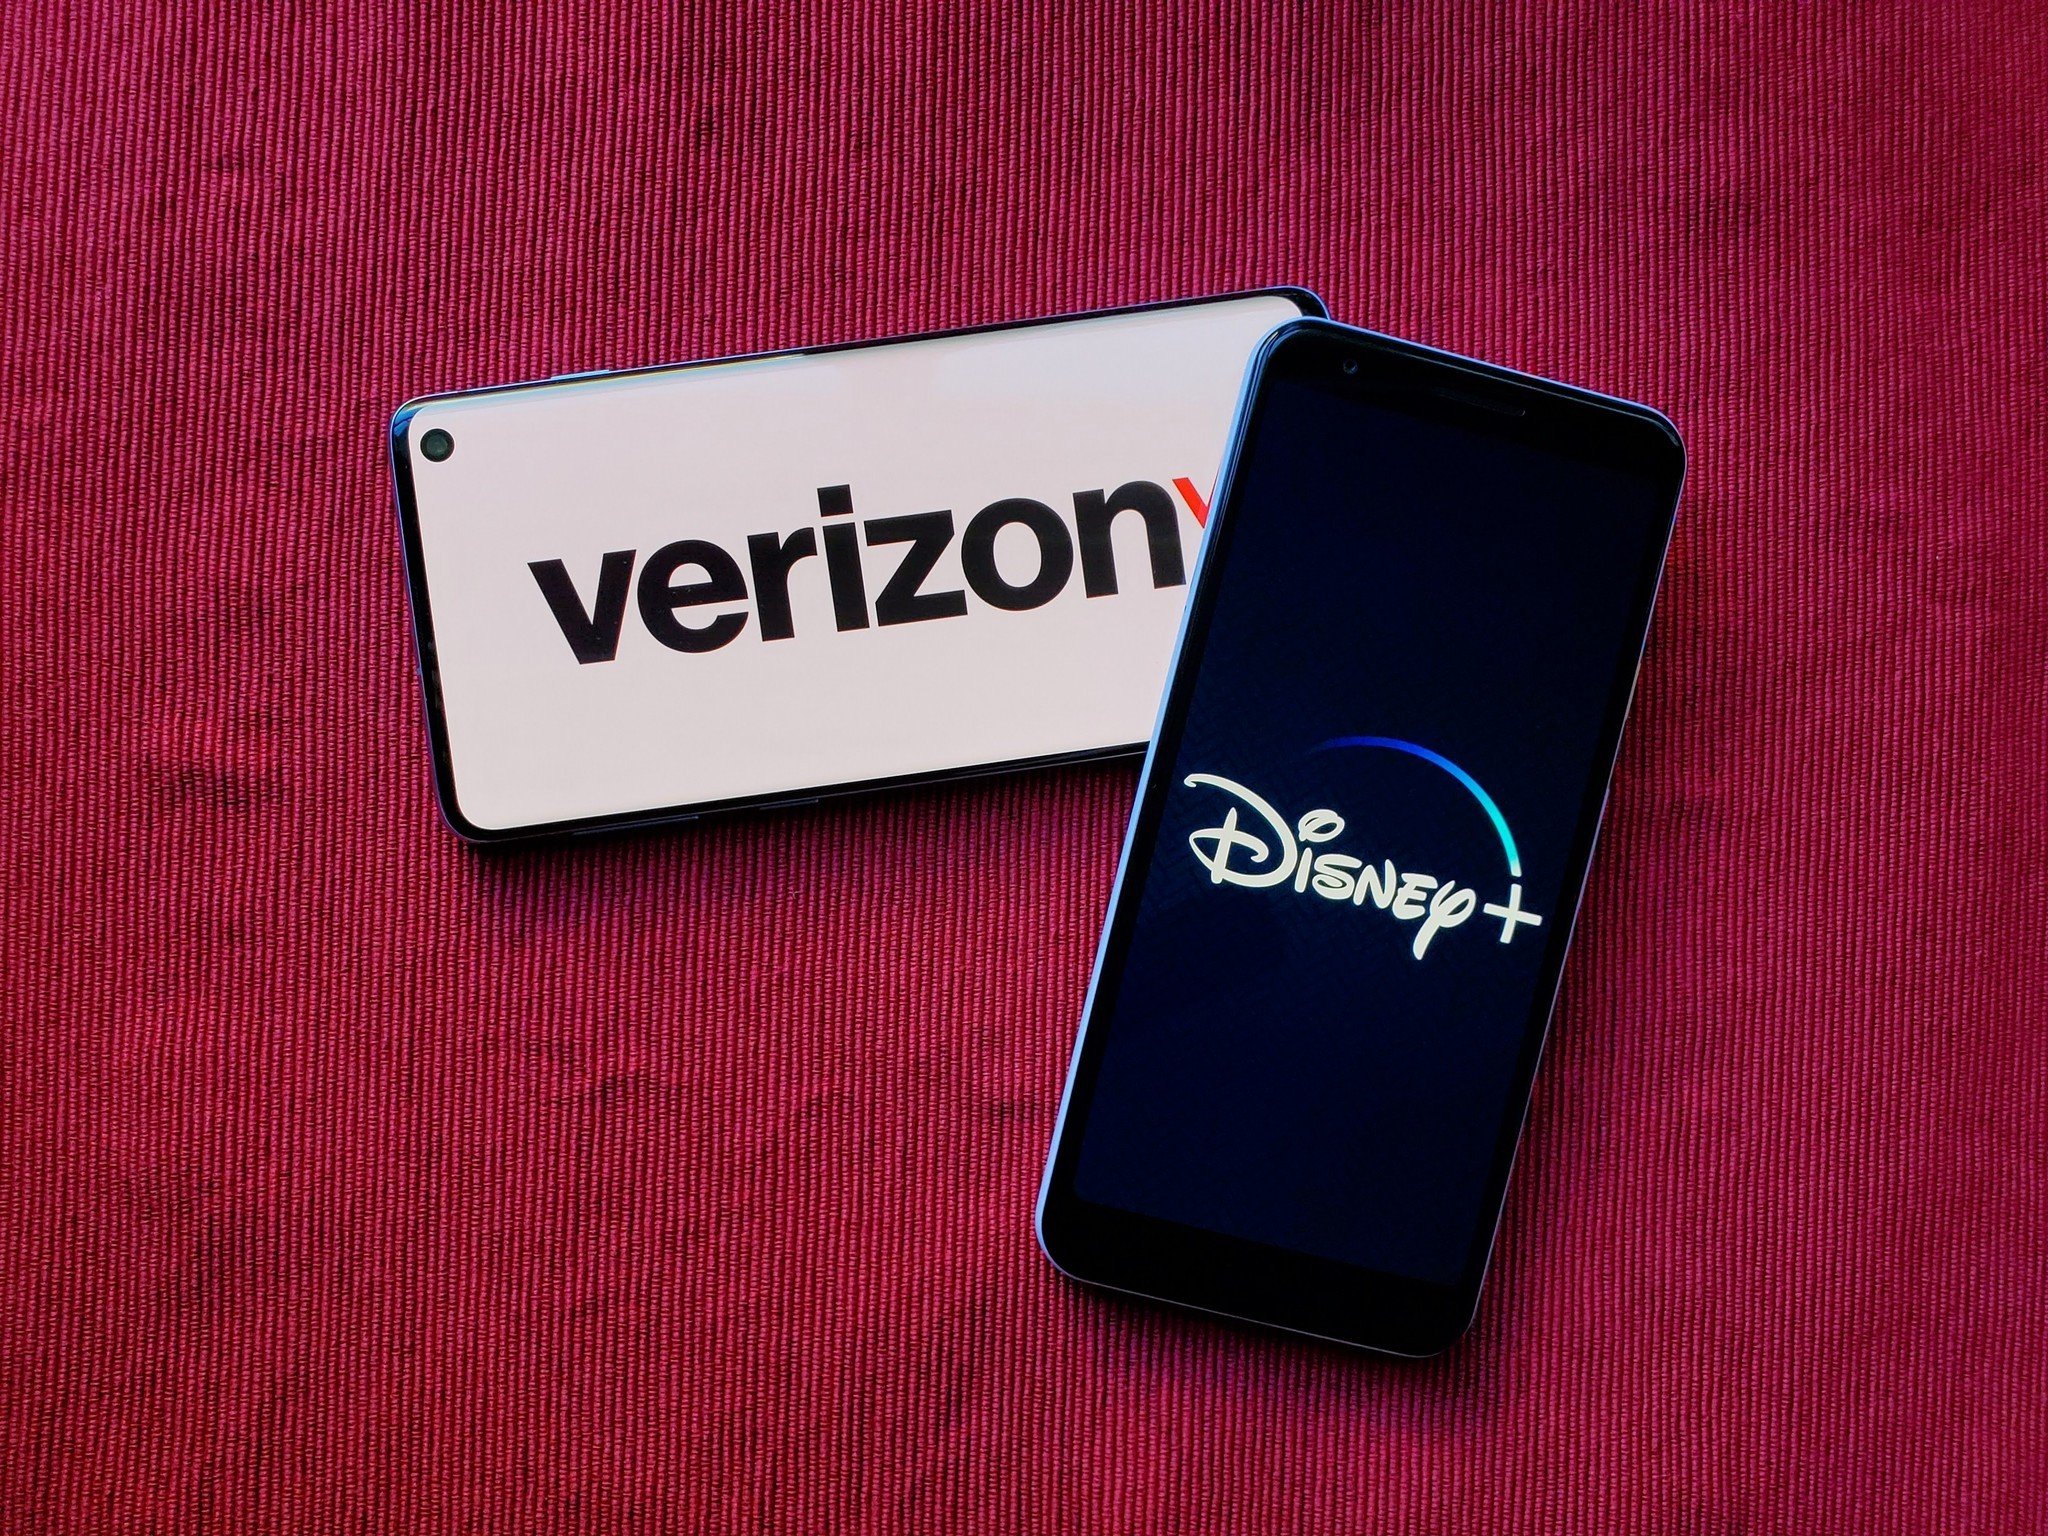 Verizon Fios Shakes Up Cable Market With Mix & Match, Contract-Free Plans